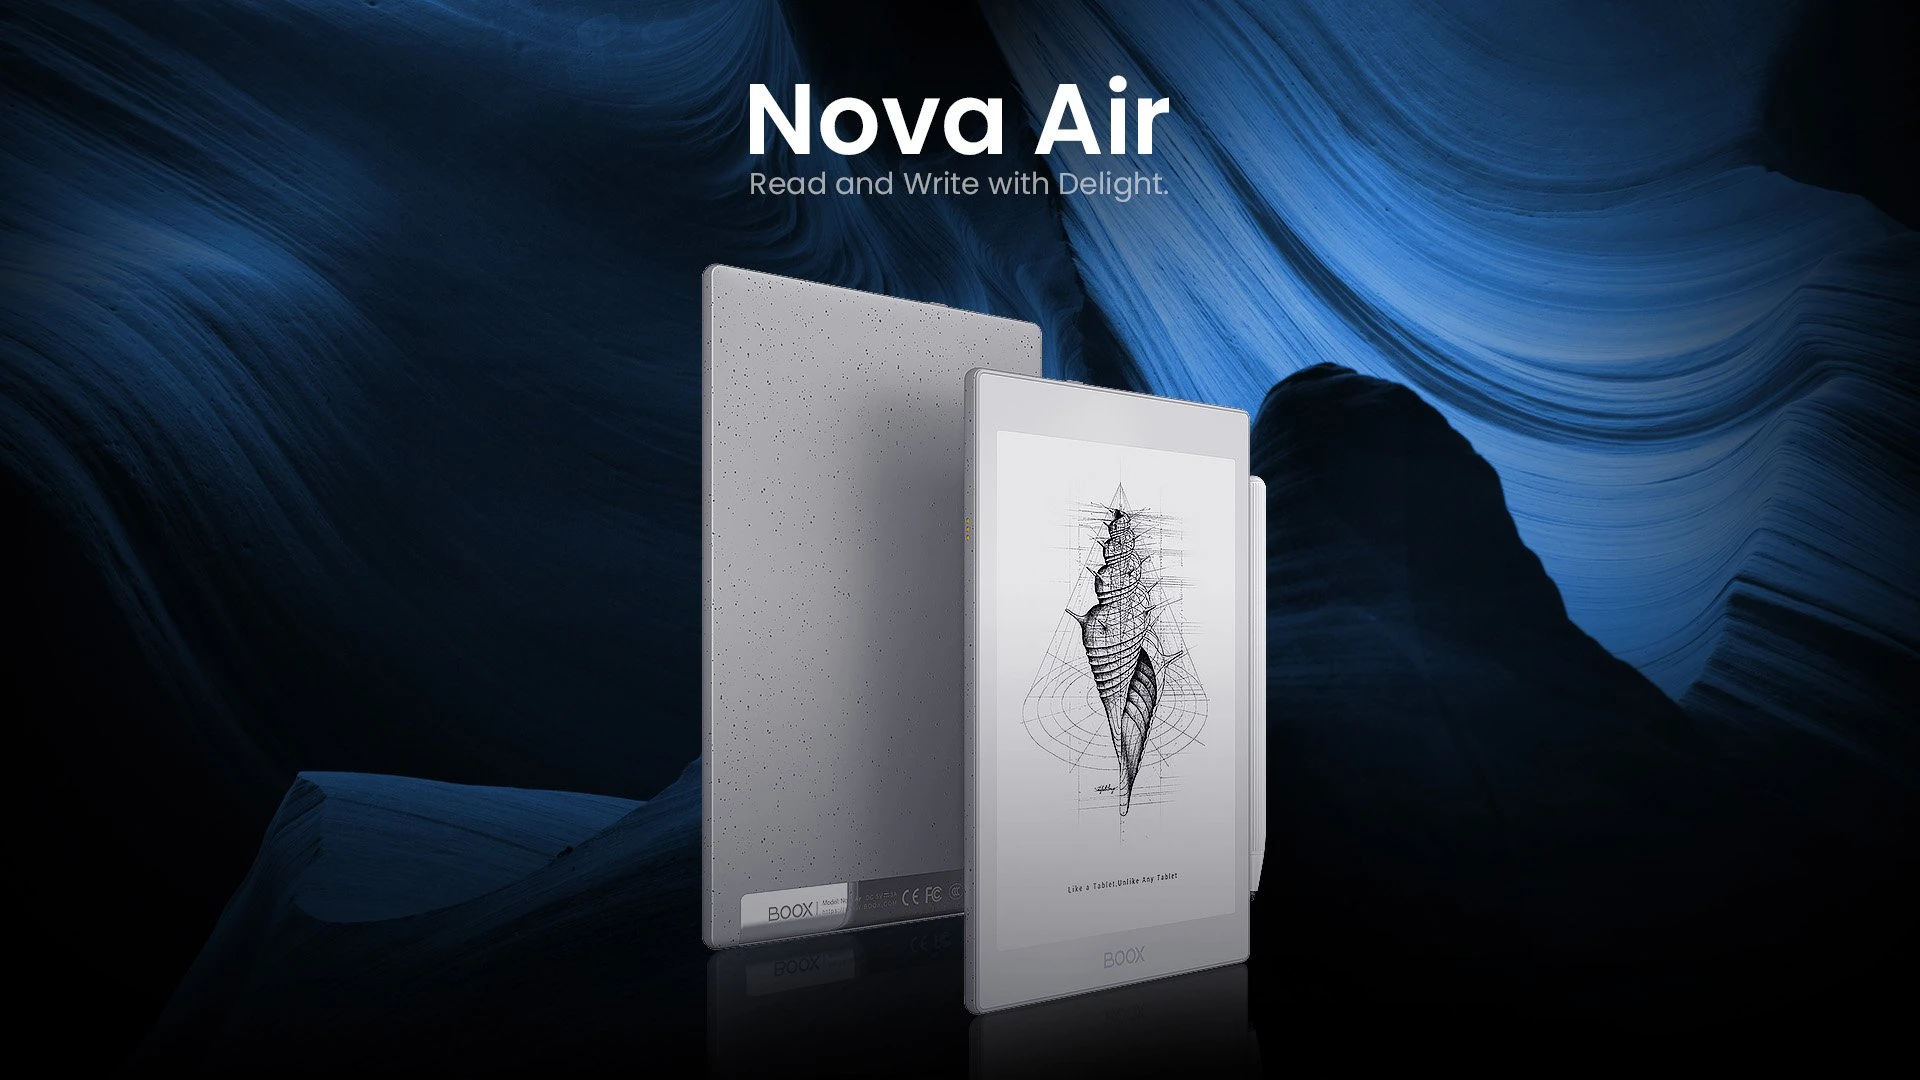 Onyx Boox Nova Air C review: color E Ink on an ambitious tablet :: ONYX BOOX  electronic books